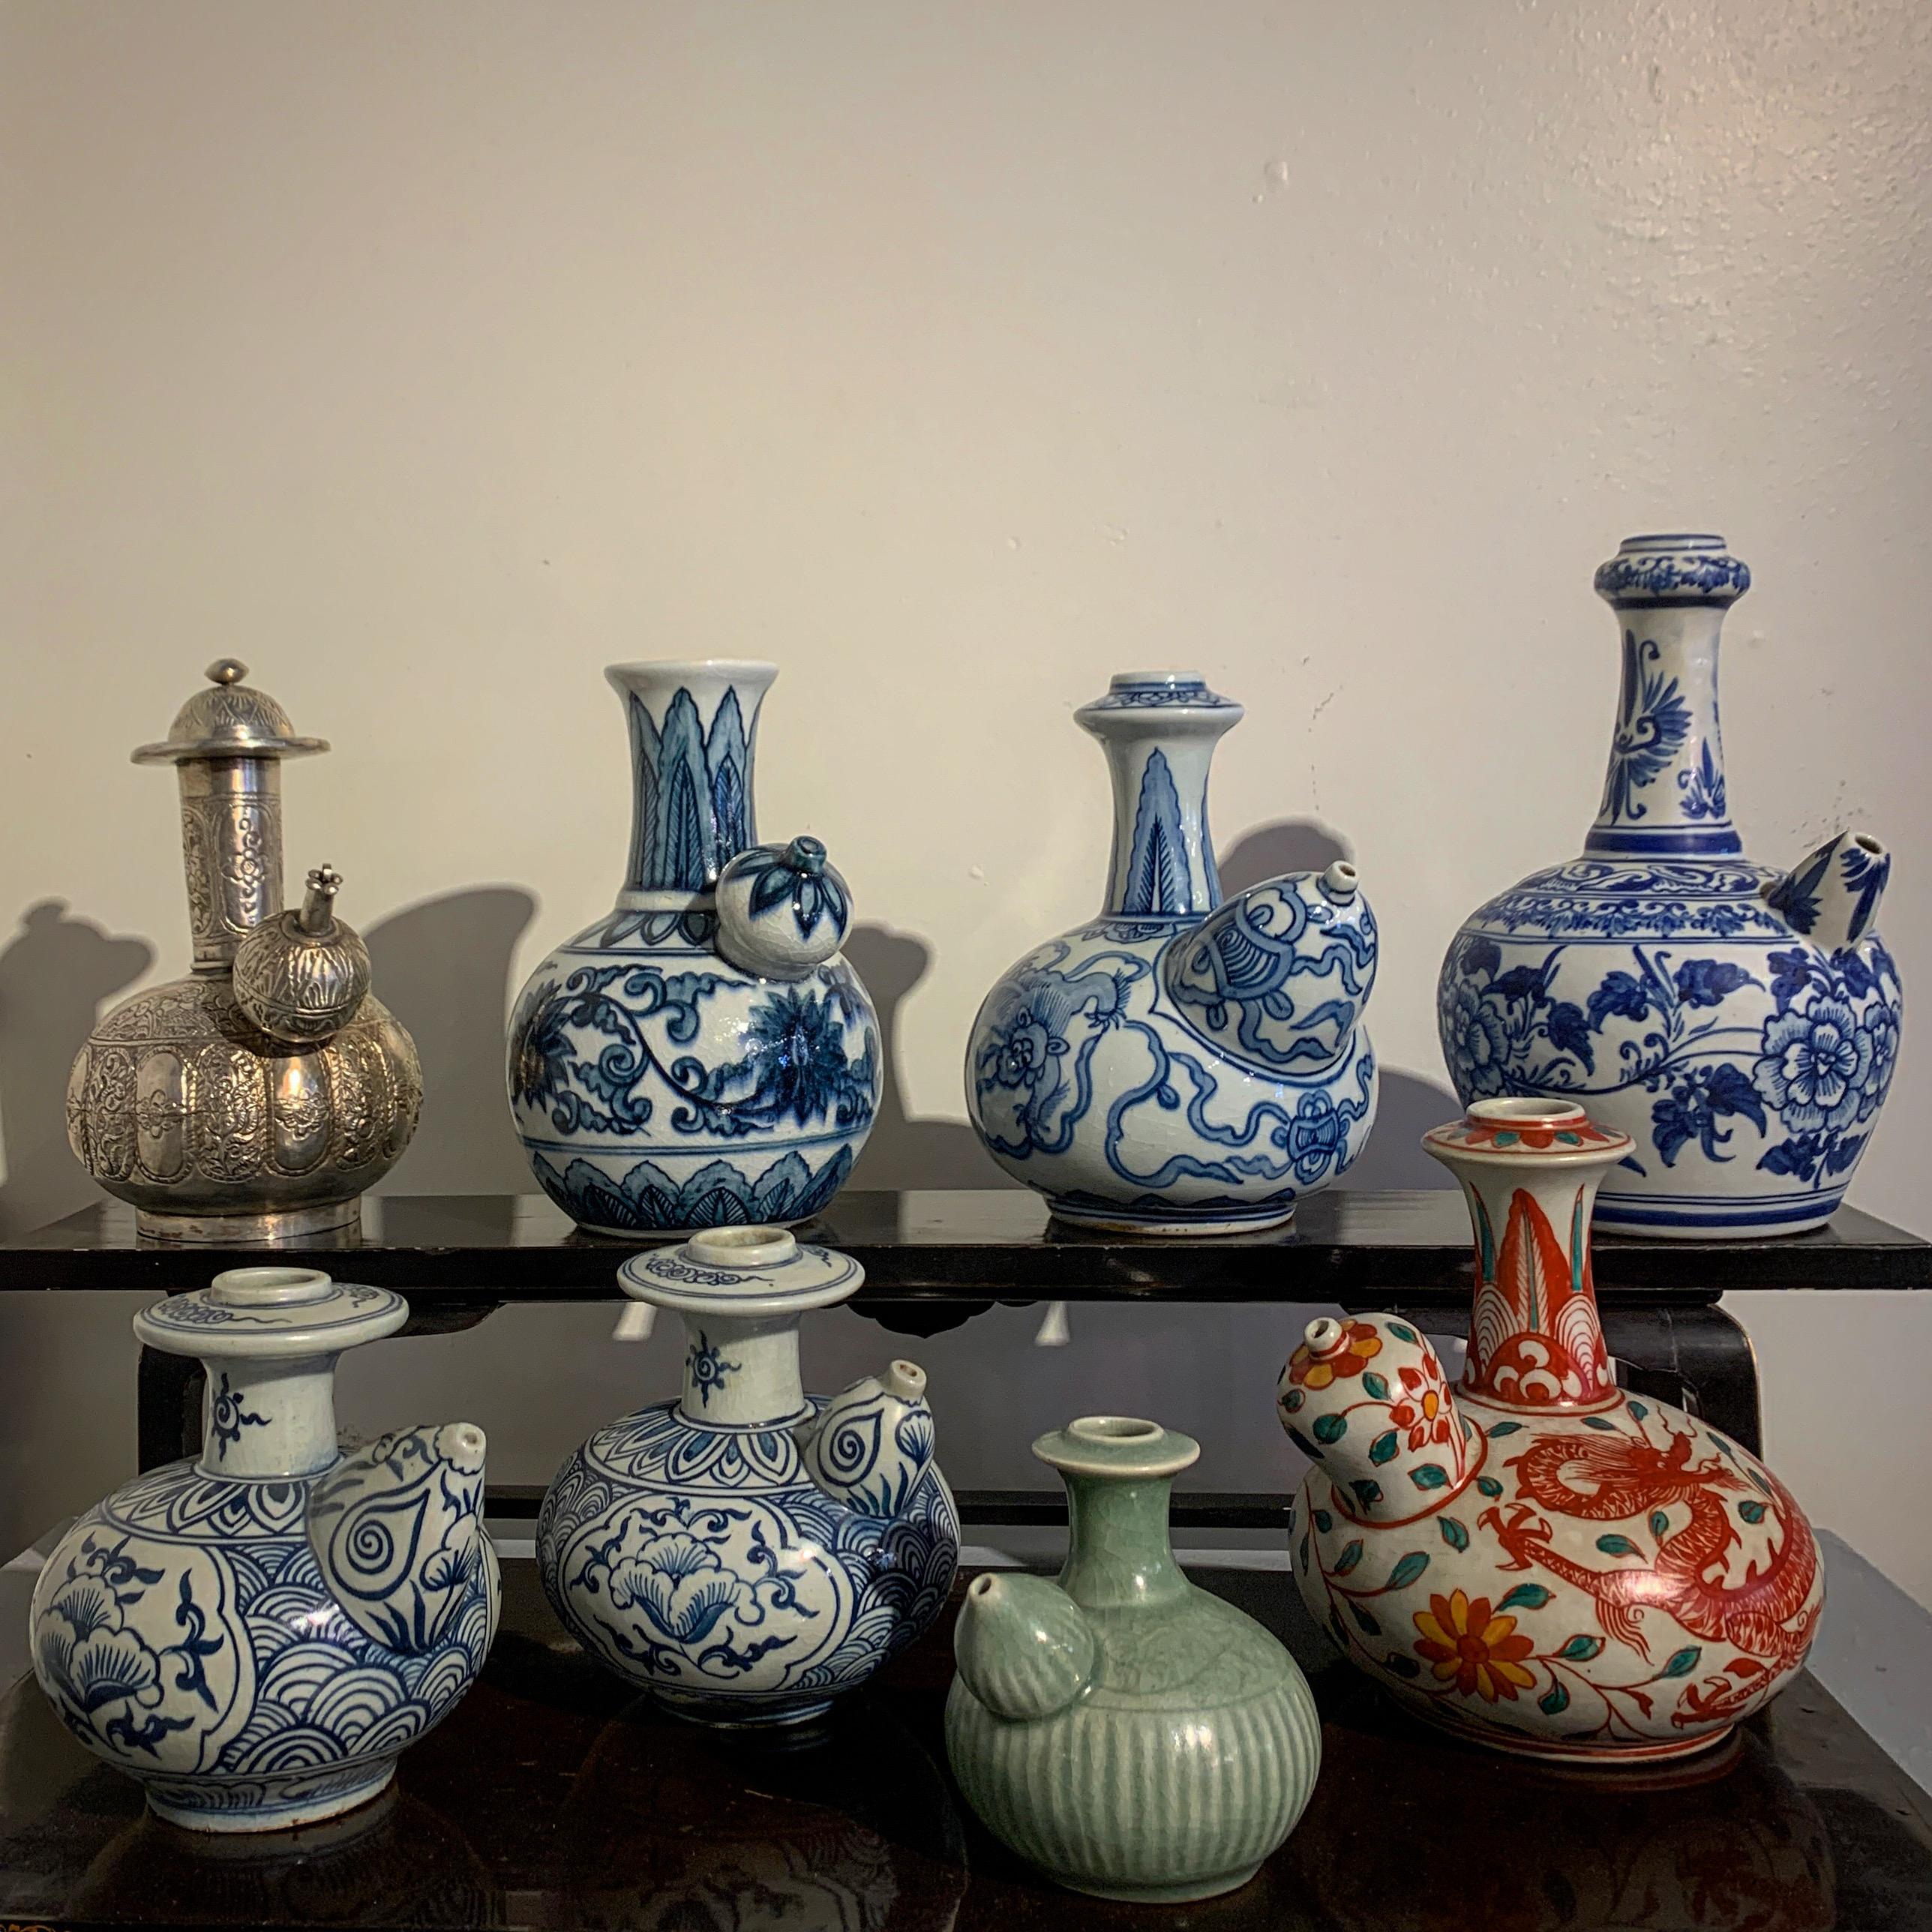 Small Vietnamese Kendi with Blue and White Design, 15th-16th Century, Vietnam 3